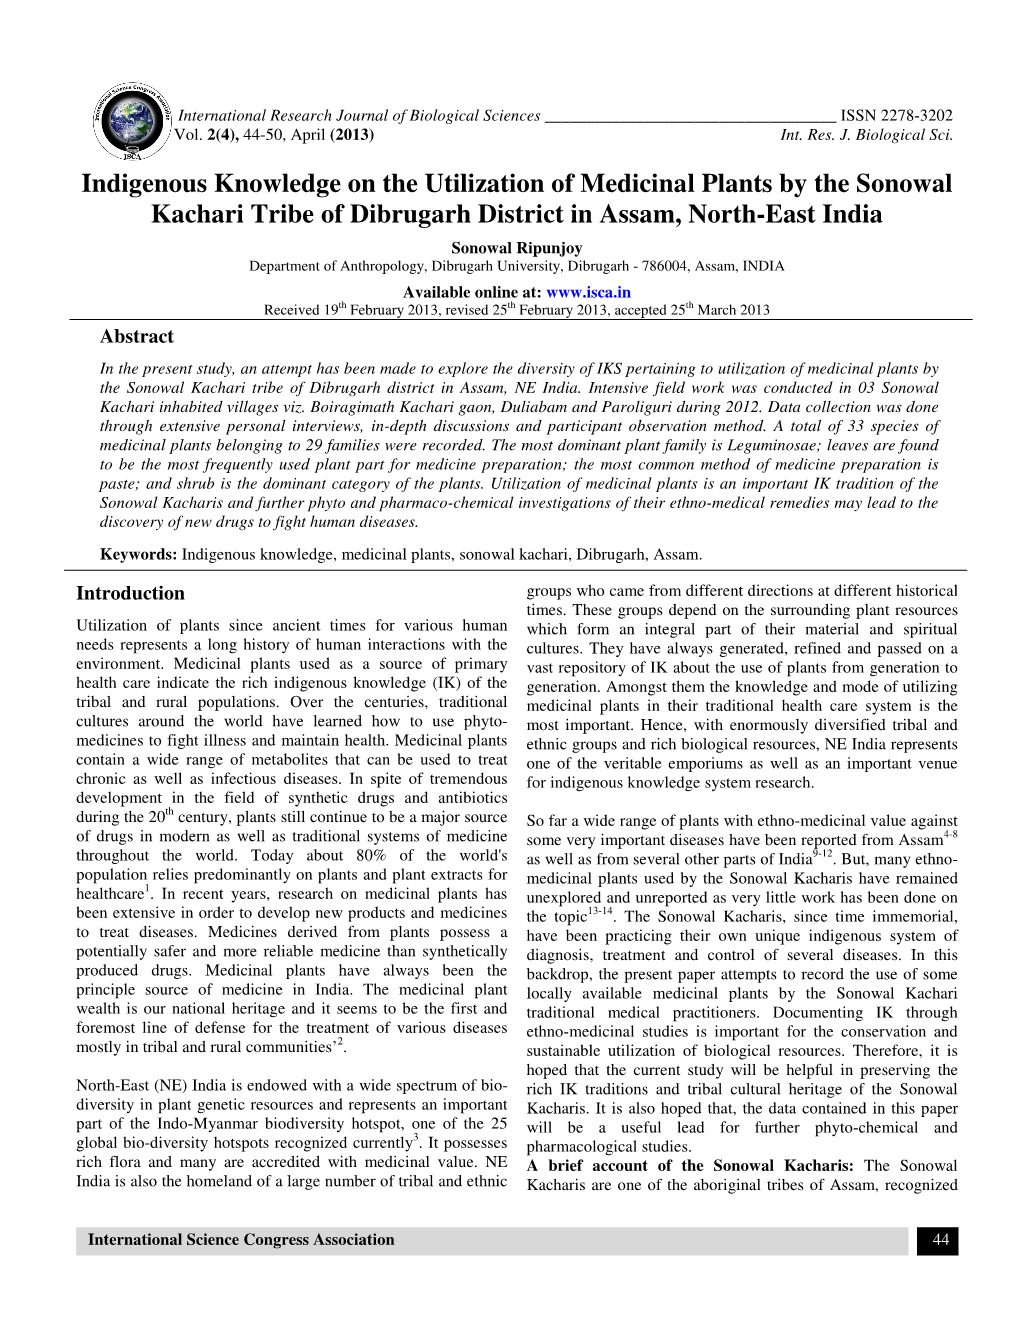 Indigenous Knowledge on the Utilization of Medicinal Plants by the Sonowal Kachari Tribe of Dibrugarh District in Assam, North-East India